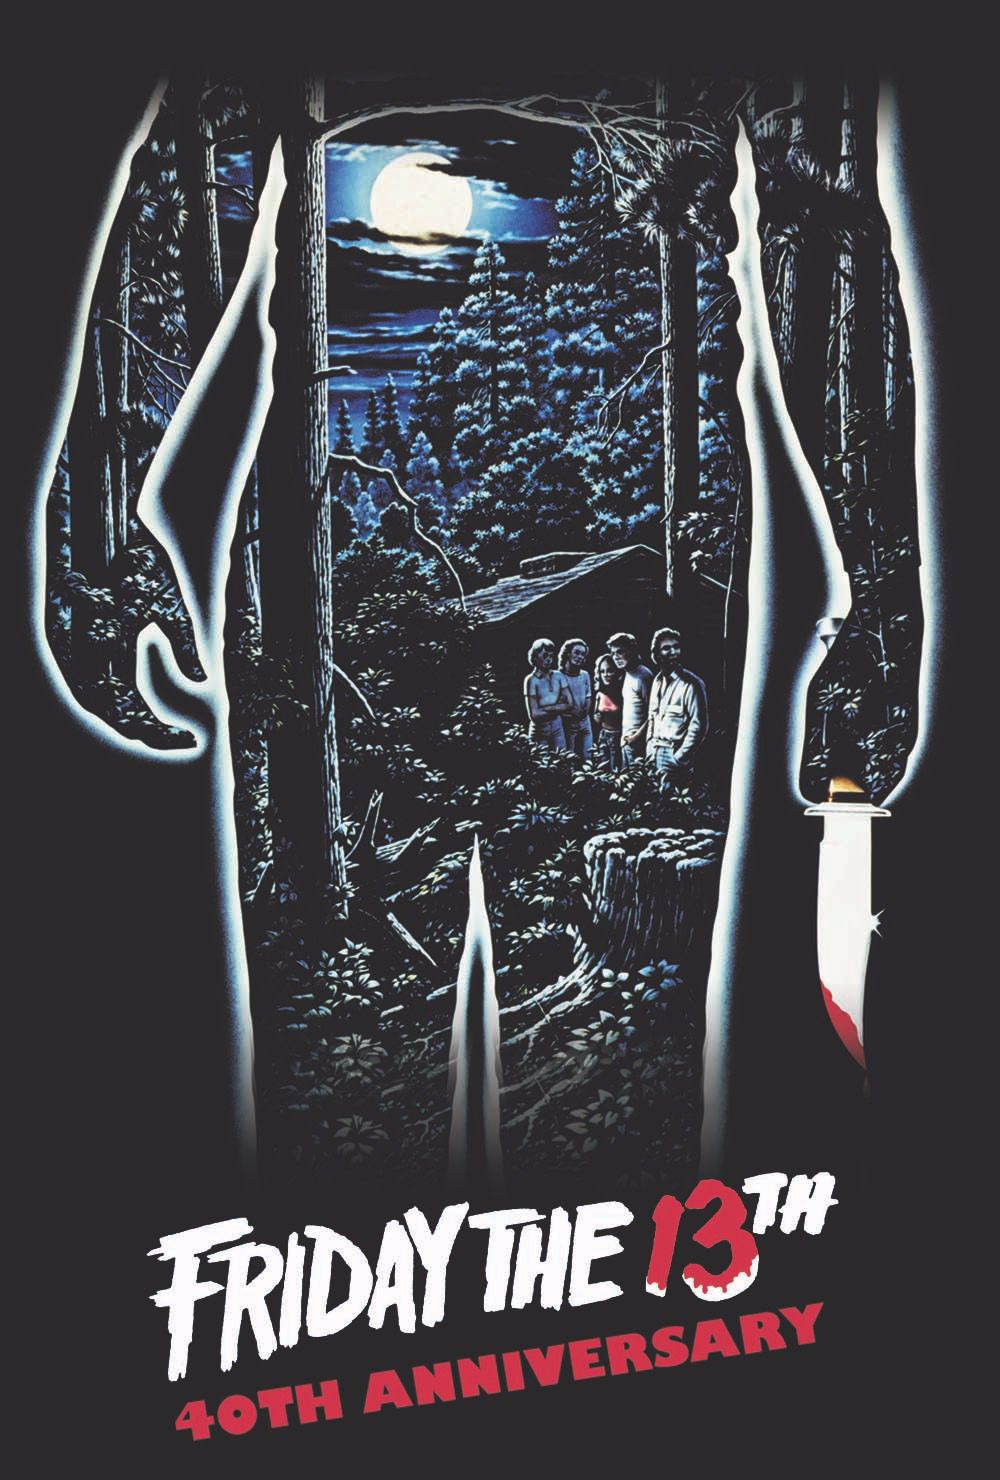 Friday the 13th 40th Anniversary Rerelease poster